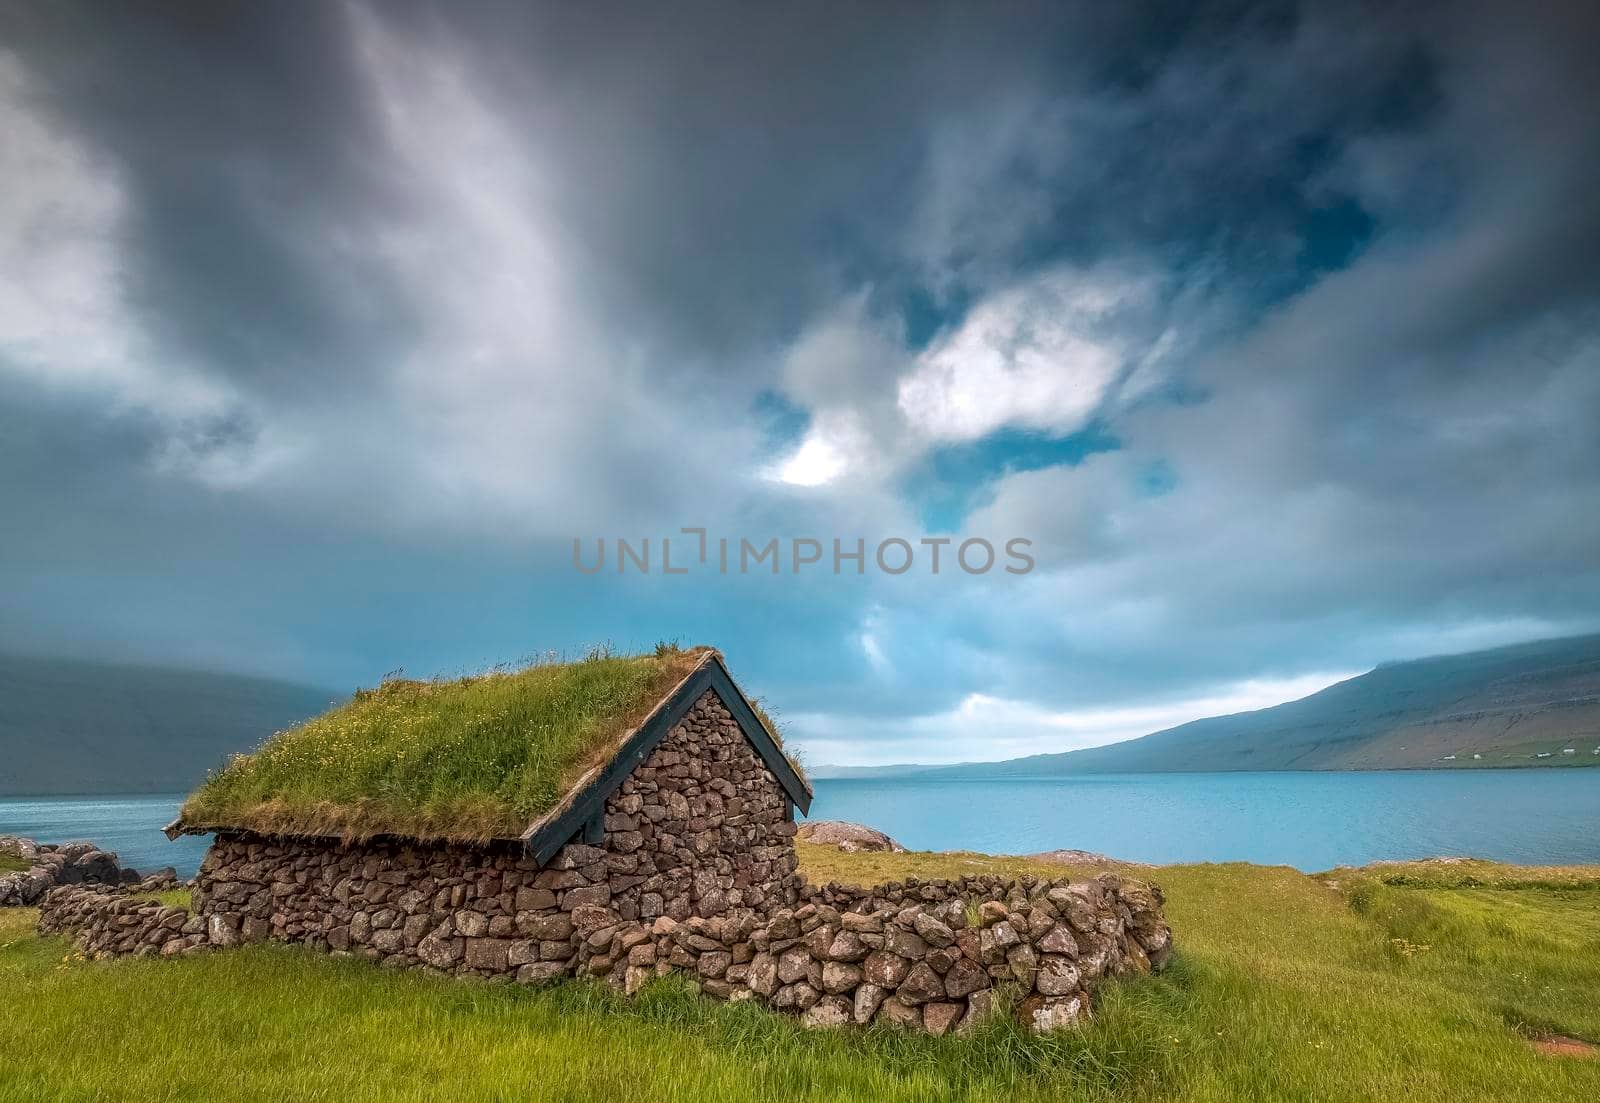 Small house near a blue lake, a small house made of stones with covered grass on the shore of a beautiful lake by isaiphoto